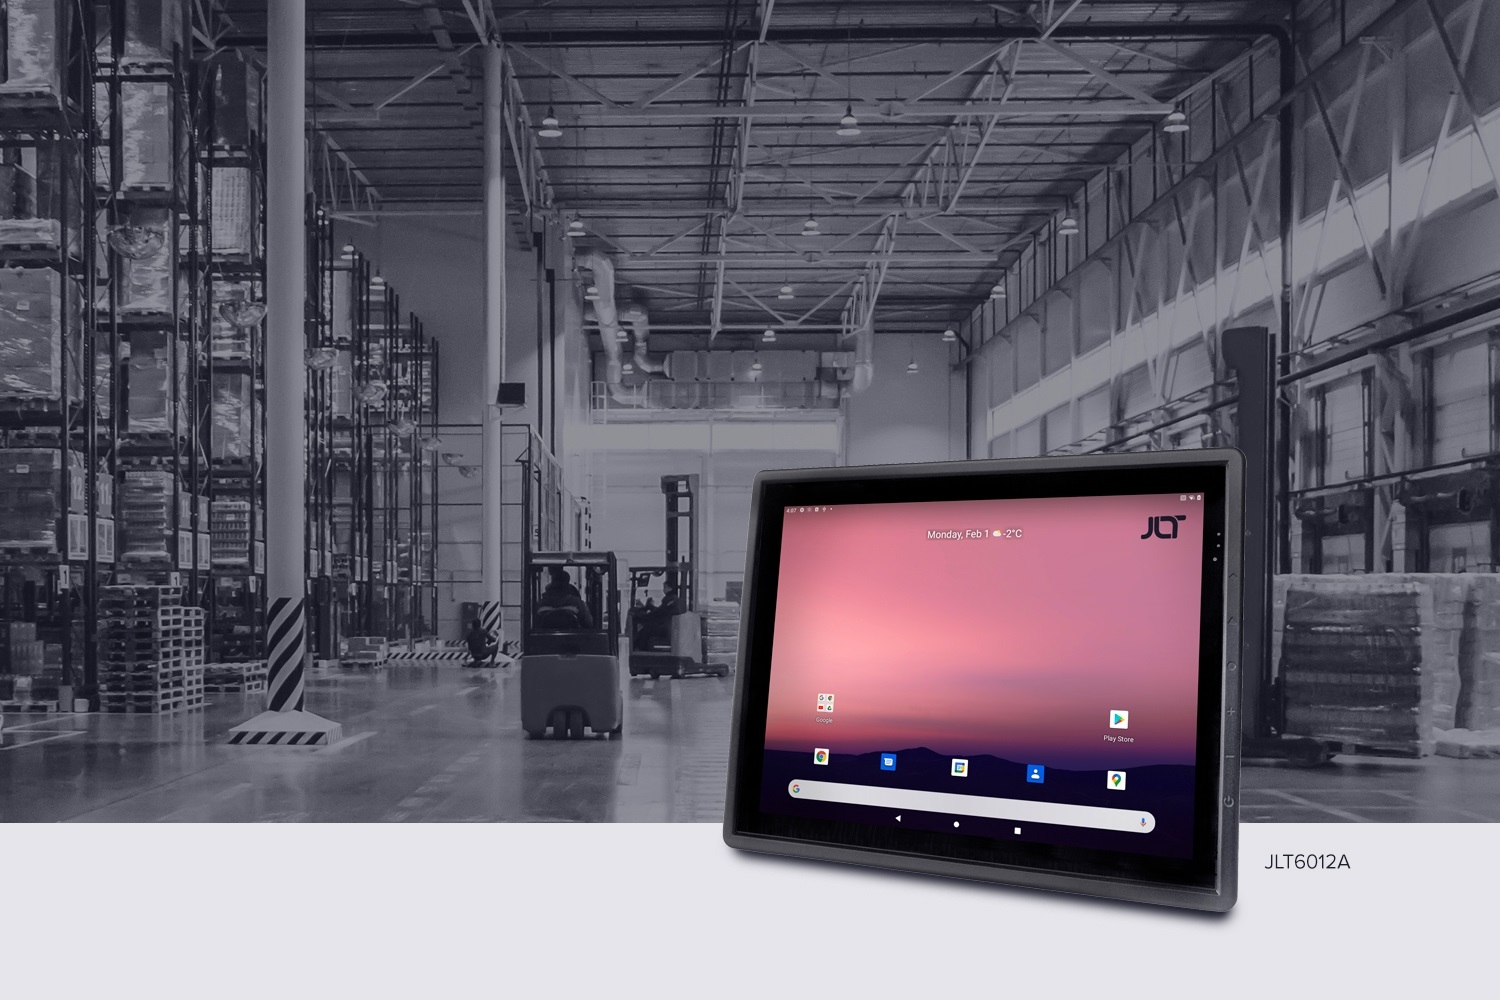 JLT6012A - a fully-rugged vehicle-mount Android computer for logistics and warehousing